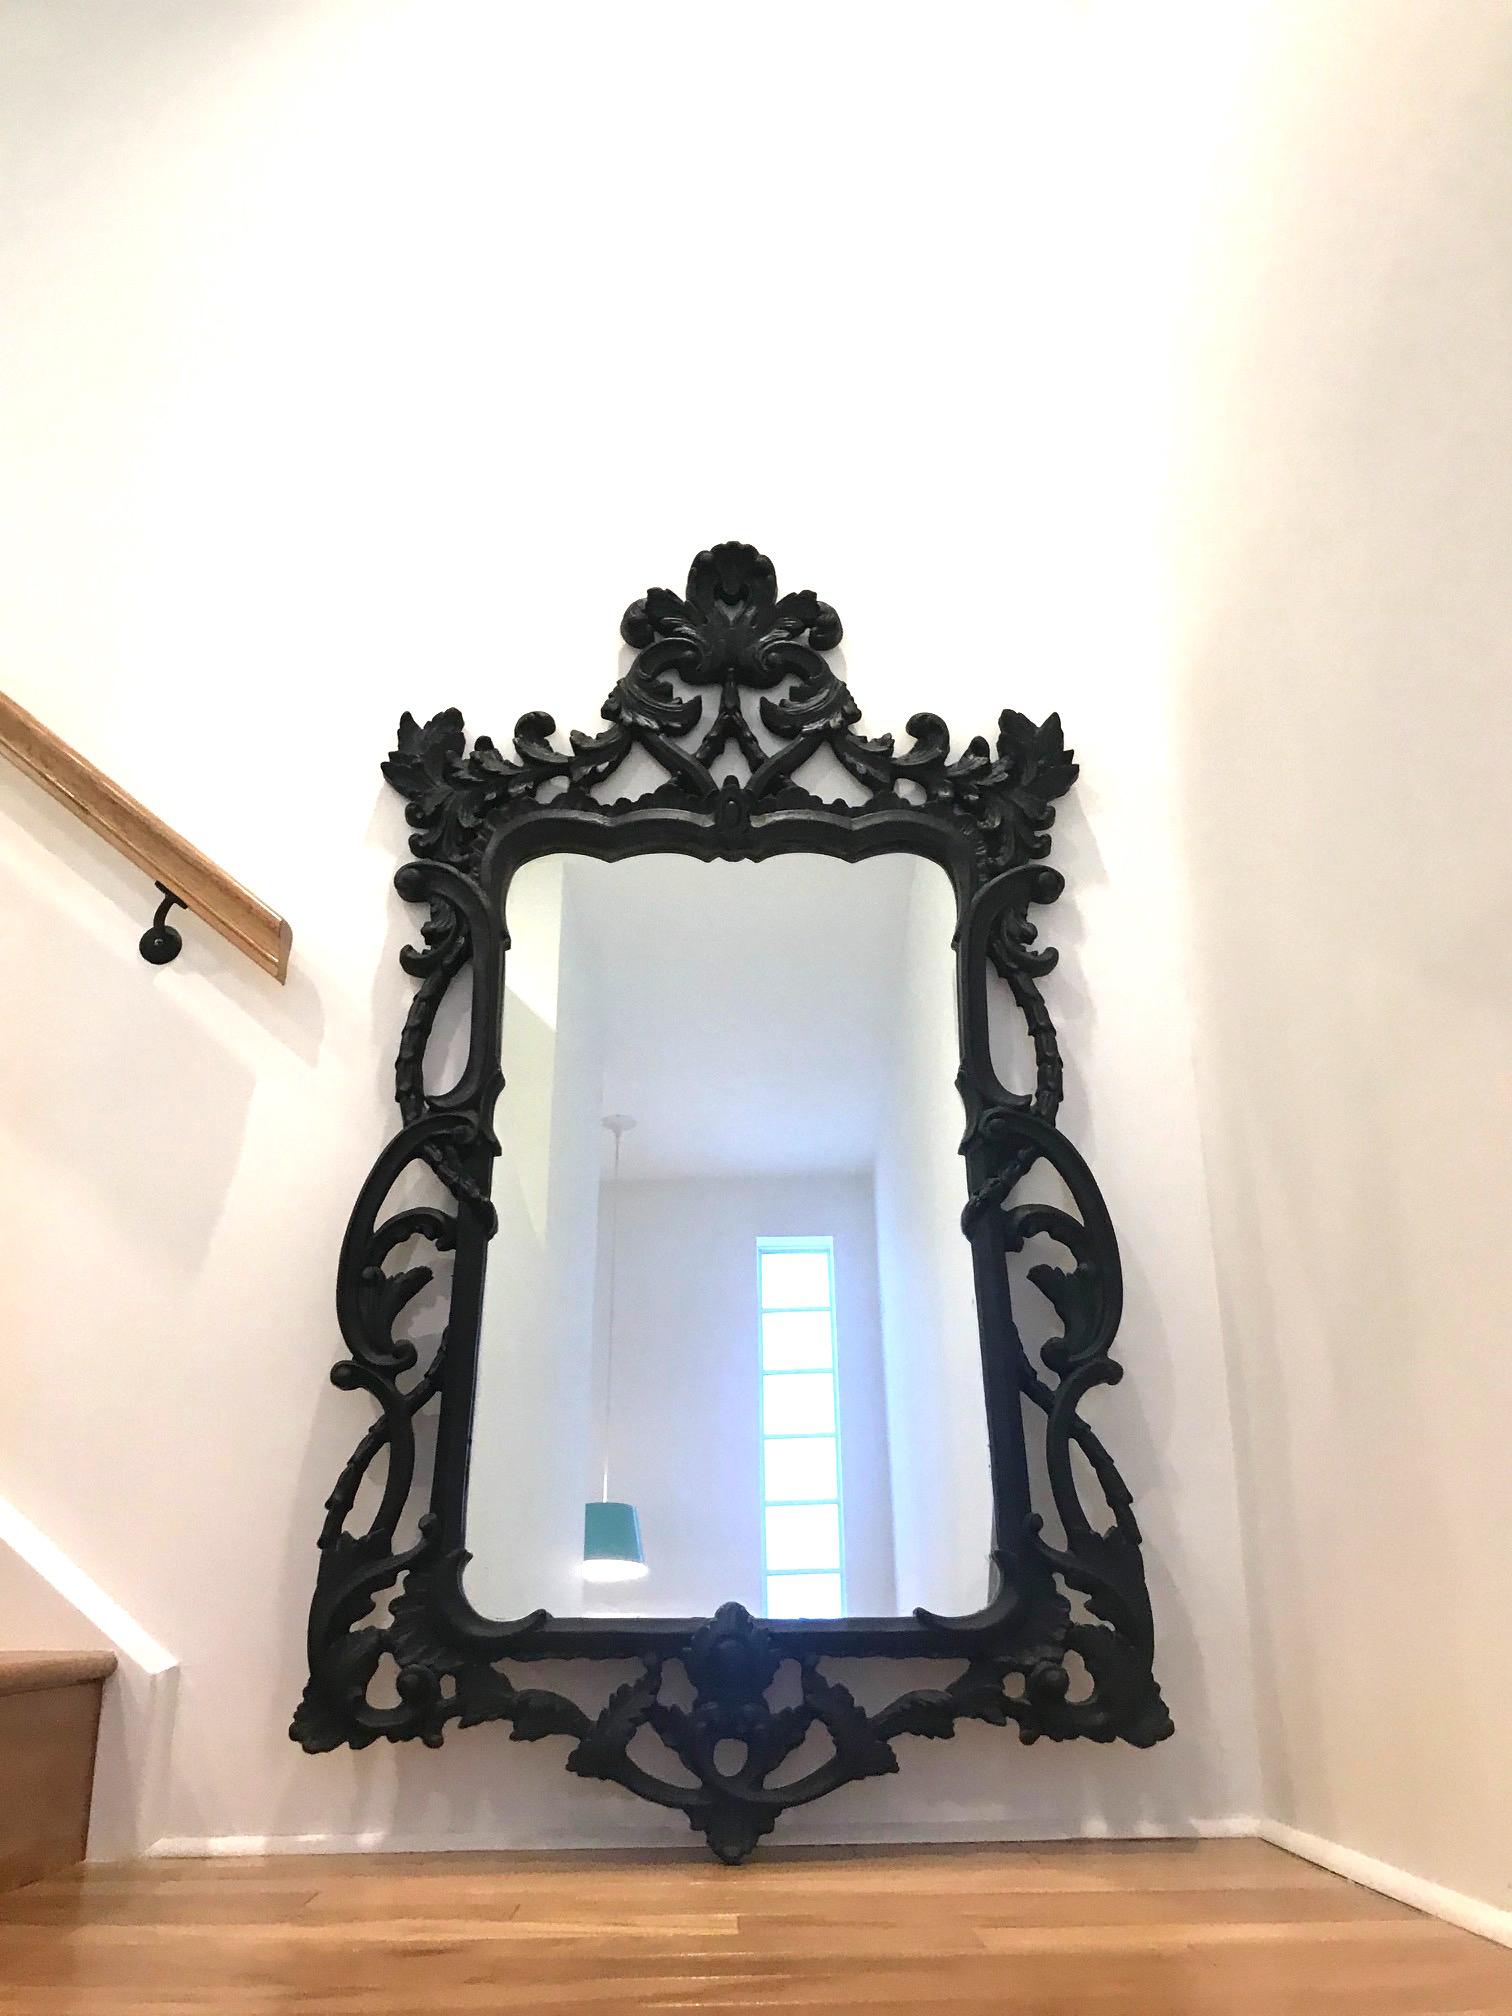 Large Hollywood Regency mirror with traditional Rococo style carved wood frame. Mirror has shield design featuring a series of hand carved scrolls with foliage details. The vintage black finish has a slightly distressed quality which gives the